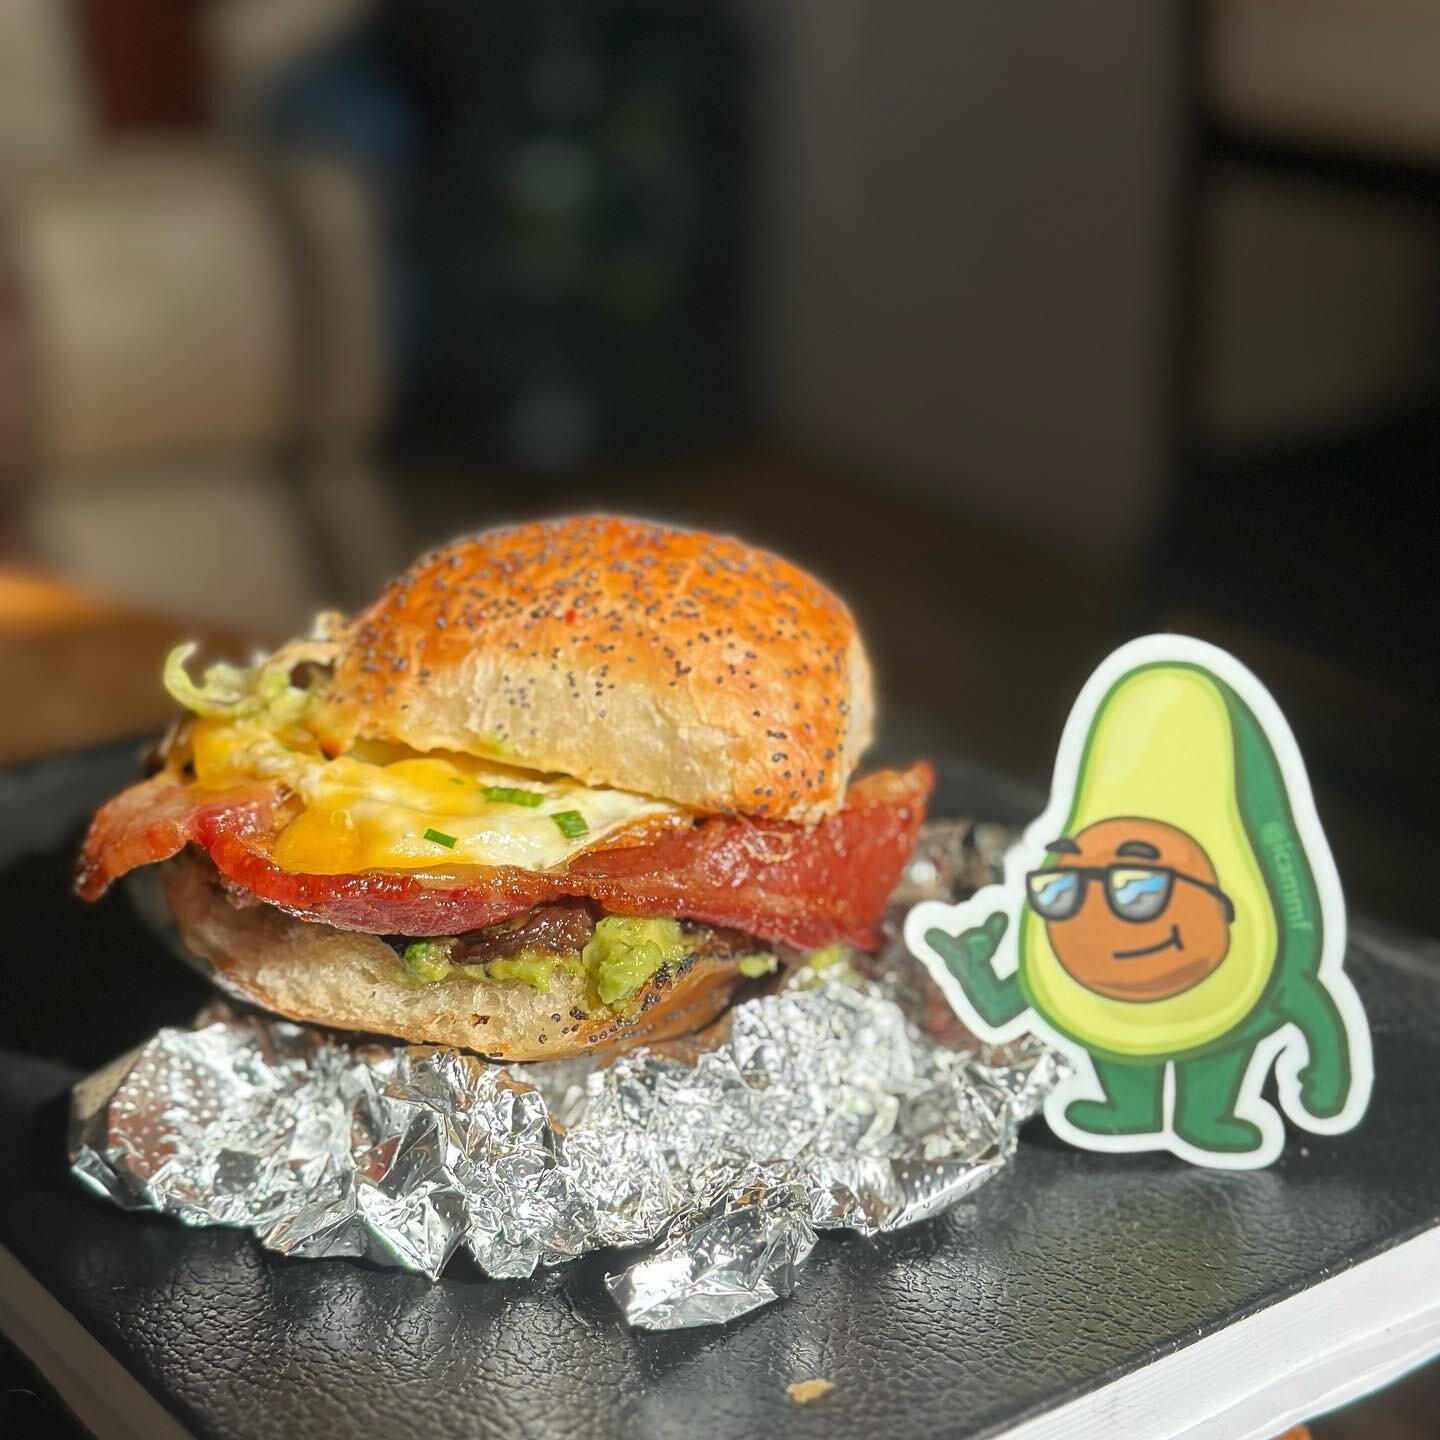 *NEW SANDWICH COLLAB*
&ldquo;The Cali Cam&rdquo;
@thymemachinepgh 

Bacon, cheddar cheese, fried egg, grilled onion, cherry pepper mayo, avacado mash, on a house-made bun.
.
Ryan&rsquo;s been making me this sandwich for a while now and I&rsquo;m hype